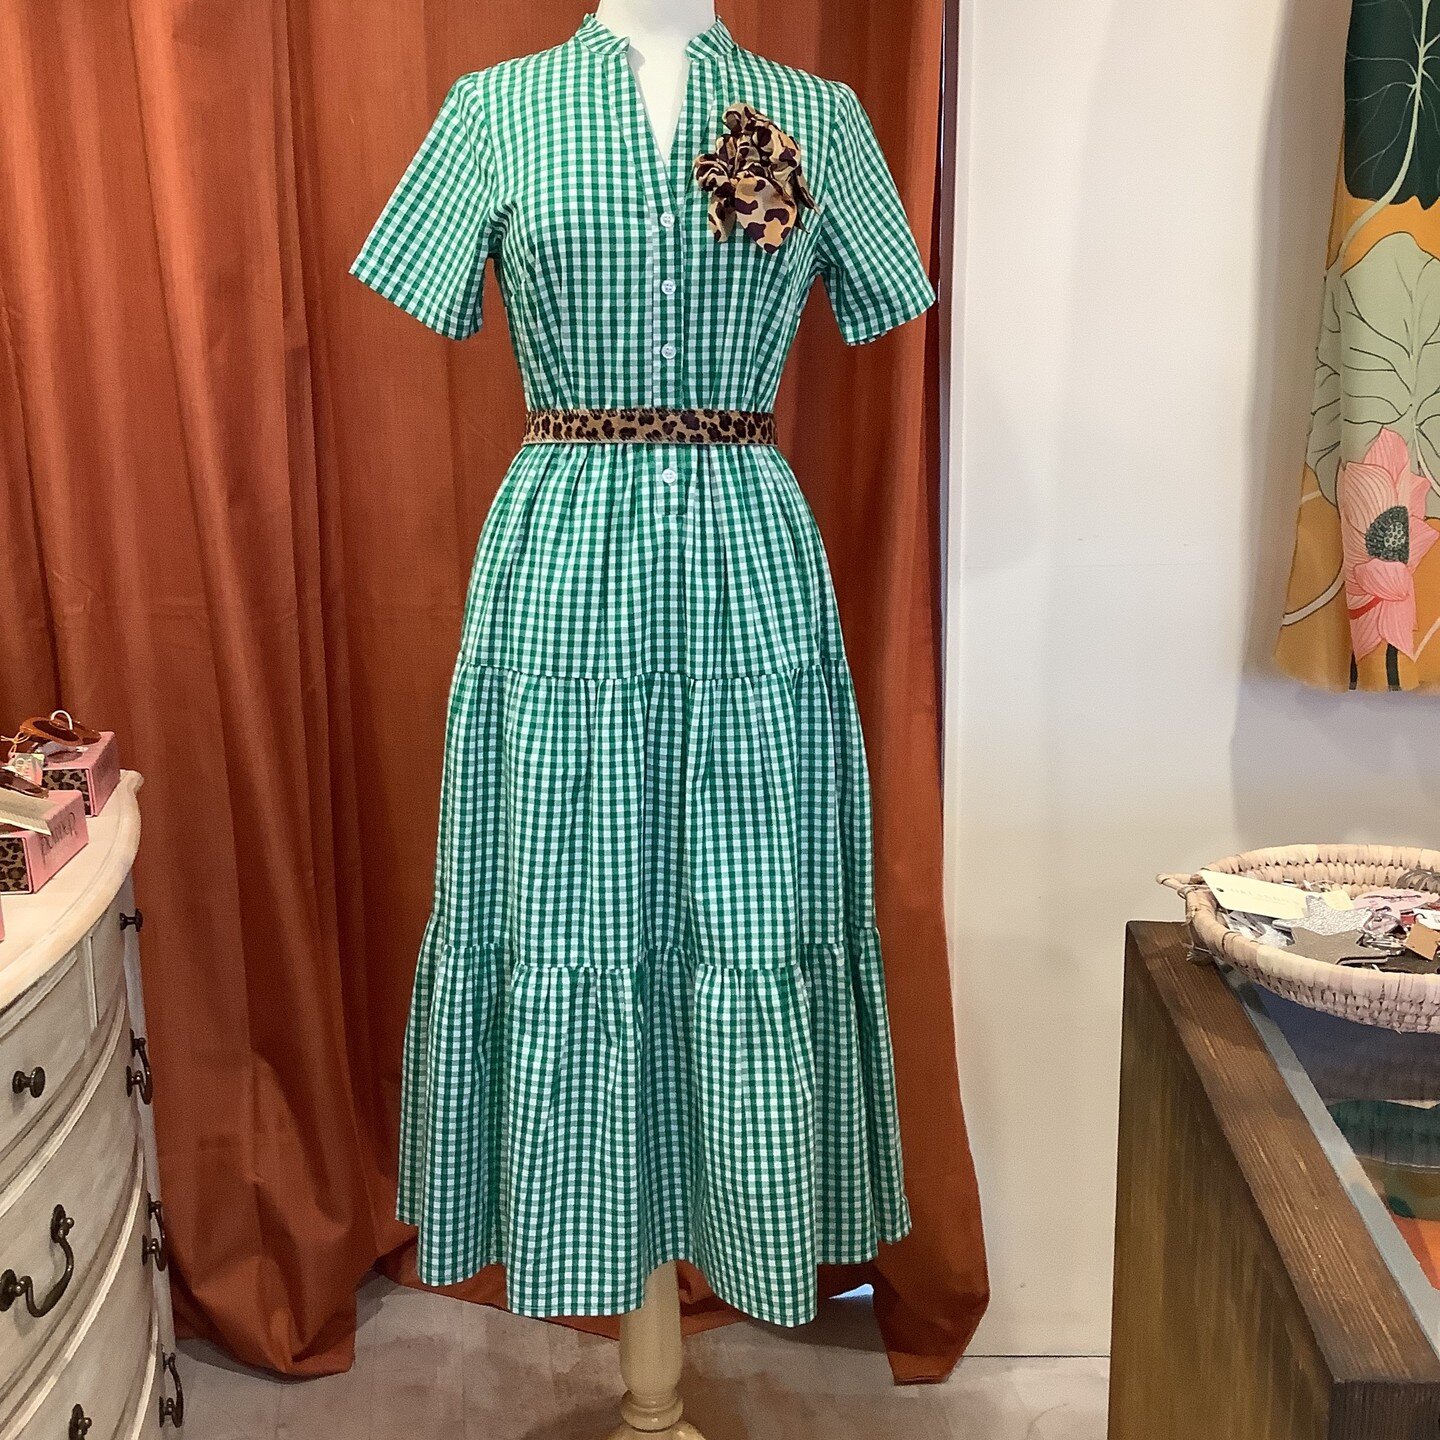 Dress of the Day. Gingham cotton lined frock styled with leopard print accessories (ignore the weather today and dream of wearing this on warm spring days!) #orlandosaldeburgh #gingham #ginghamdress #leopardprint #summerdress #fashion #dress #aldebur